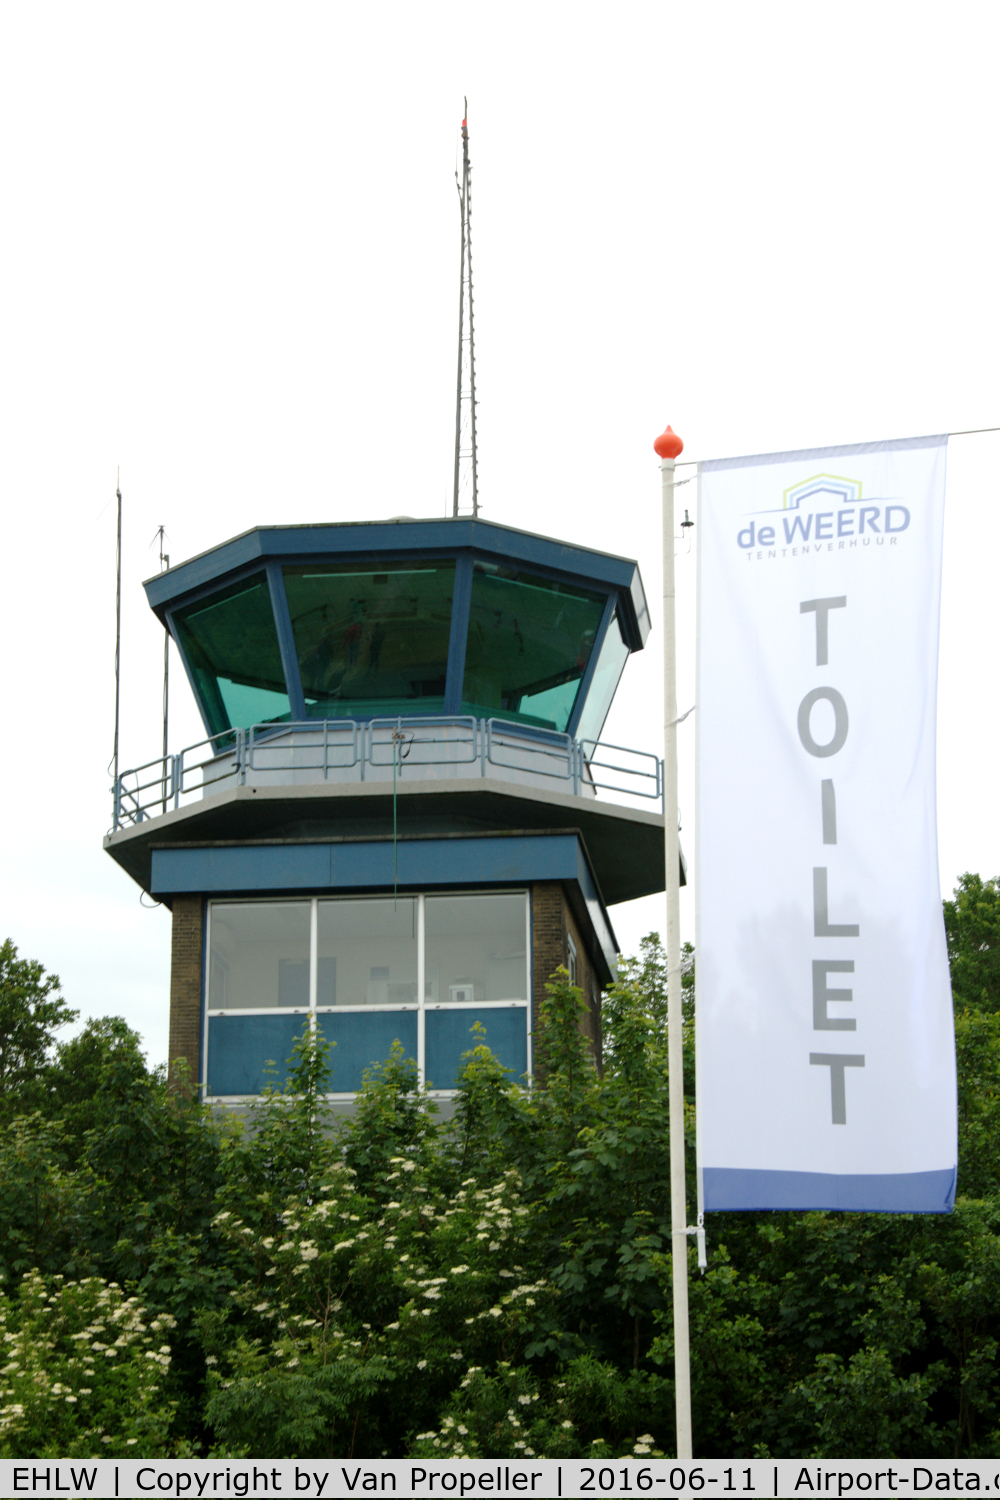 Leeuwarden Air Base Airport, Leeuwarden Netherlands (EHLW) - The control tower during the 2016 open days of the Royal Netherlands Air Force at Leeuwarden Air Base